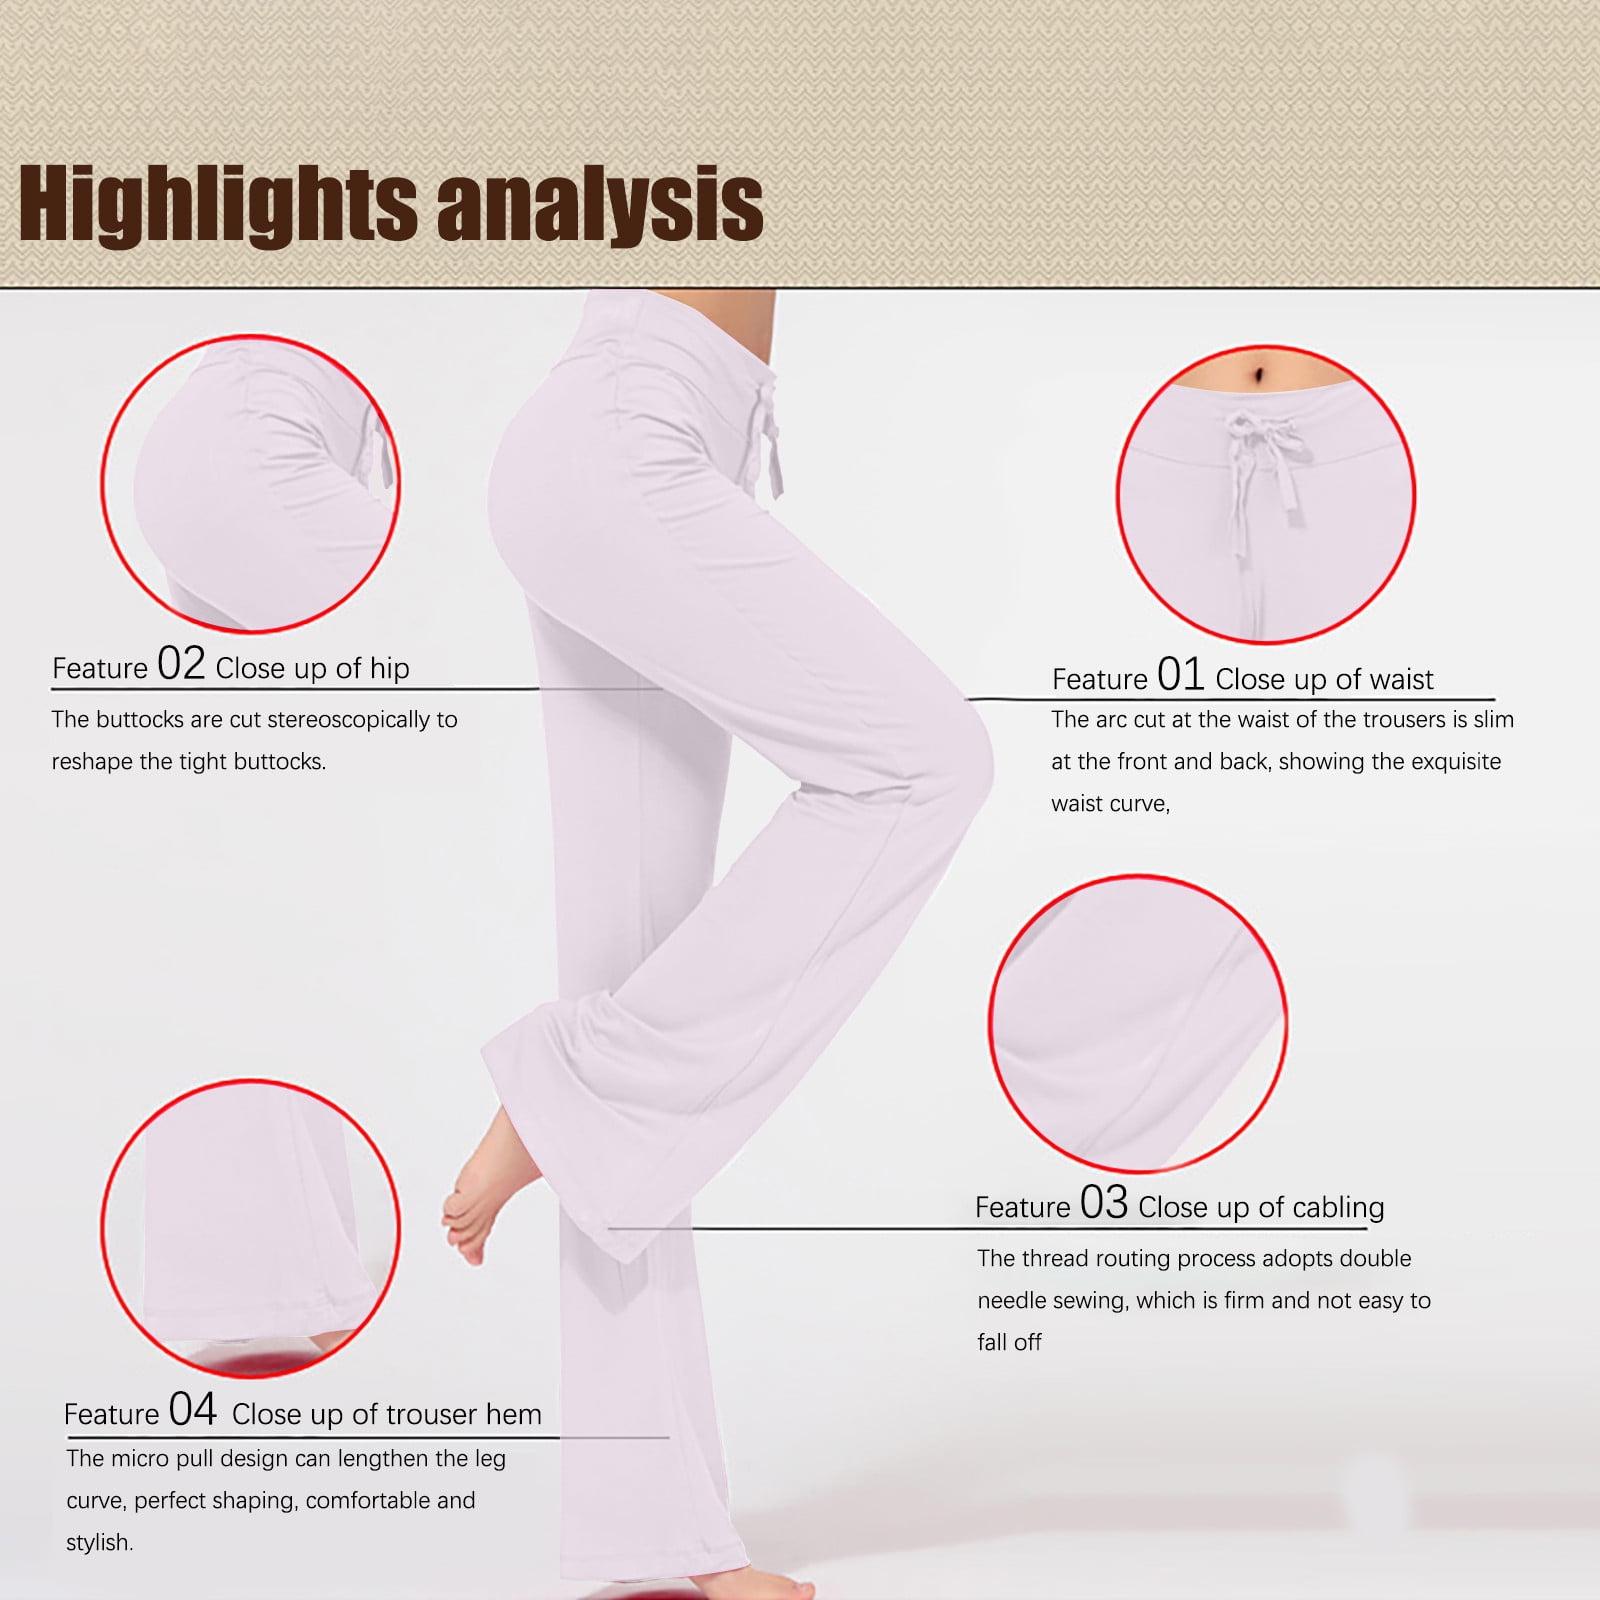 Women Trackpants Combo - Comfort fit (Soft Co-ord lining COTTON blend Lycra  fabric) (stretchable|women's plus size track|gym pants|tights|trousers|pants|stylish  lower|tracks|black track pants|women trackpants combo pack|bottoms combo  offer|night pants ...